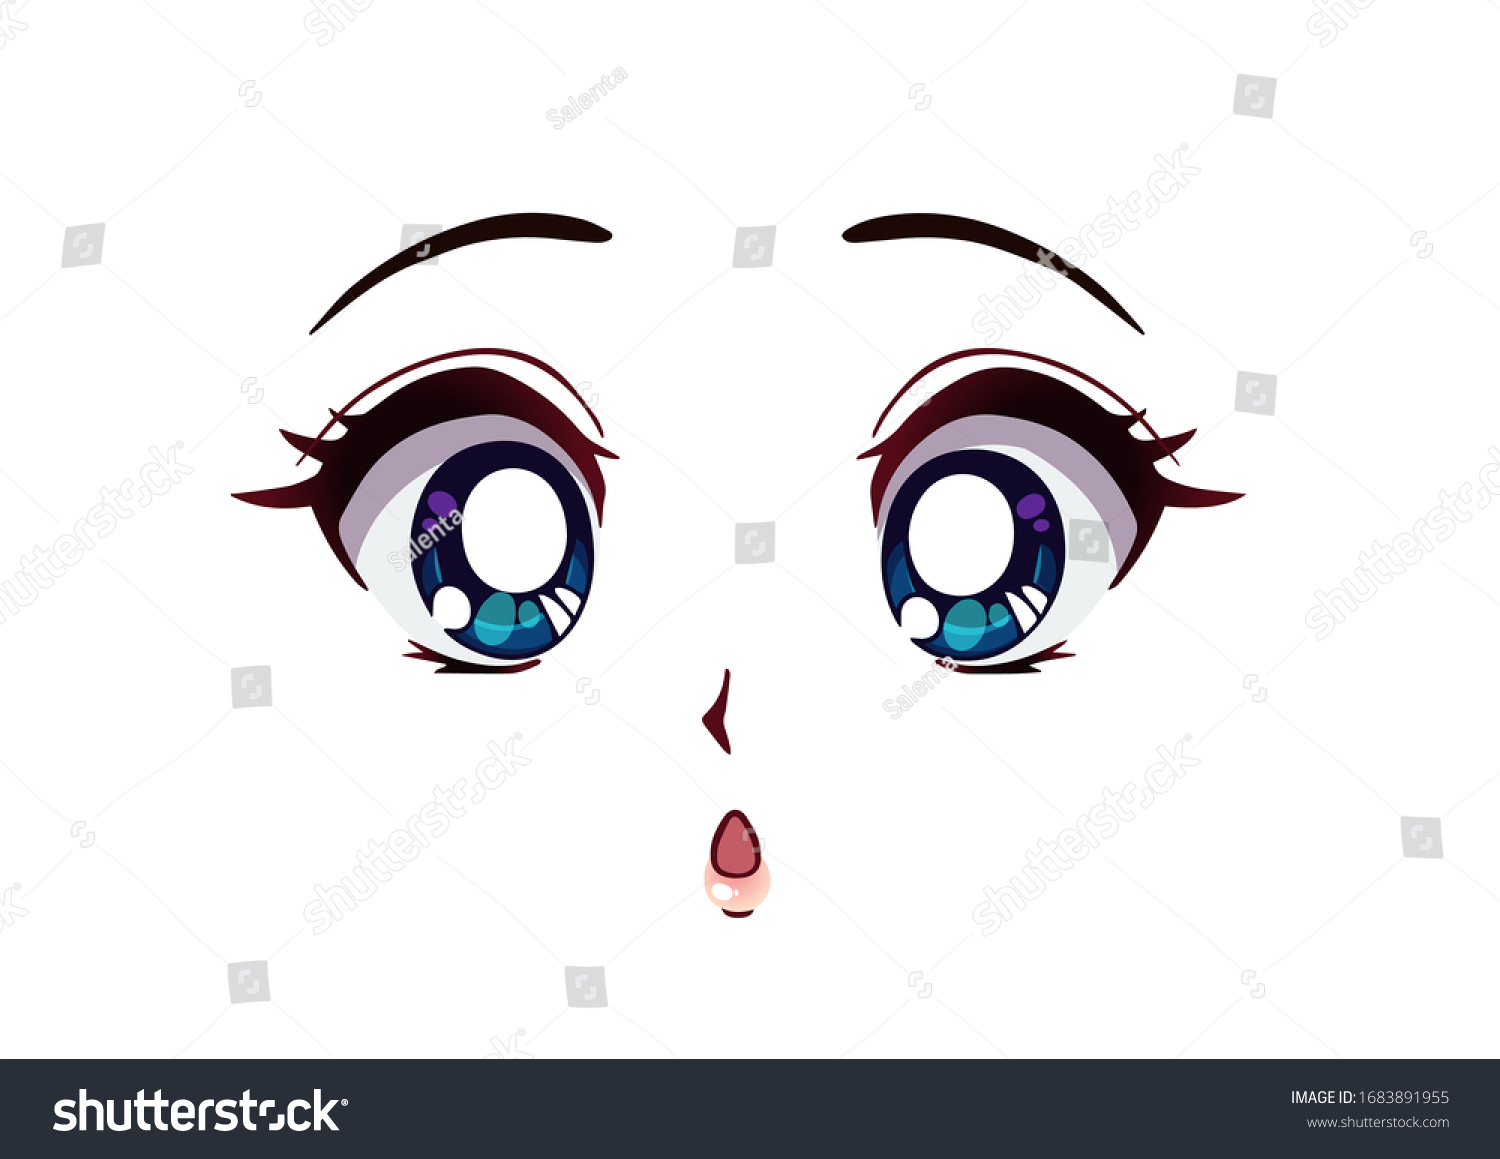 Surprised Anime Face Manga Style Big Stock Vector Royalty Free 1683891955